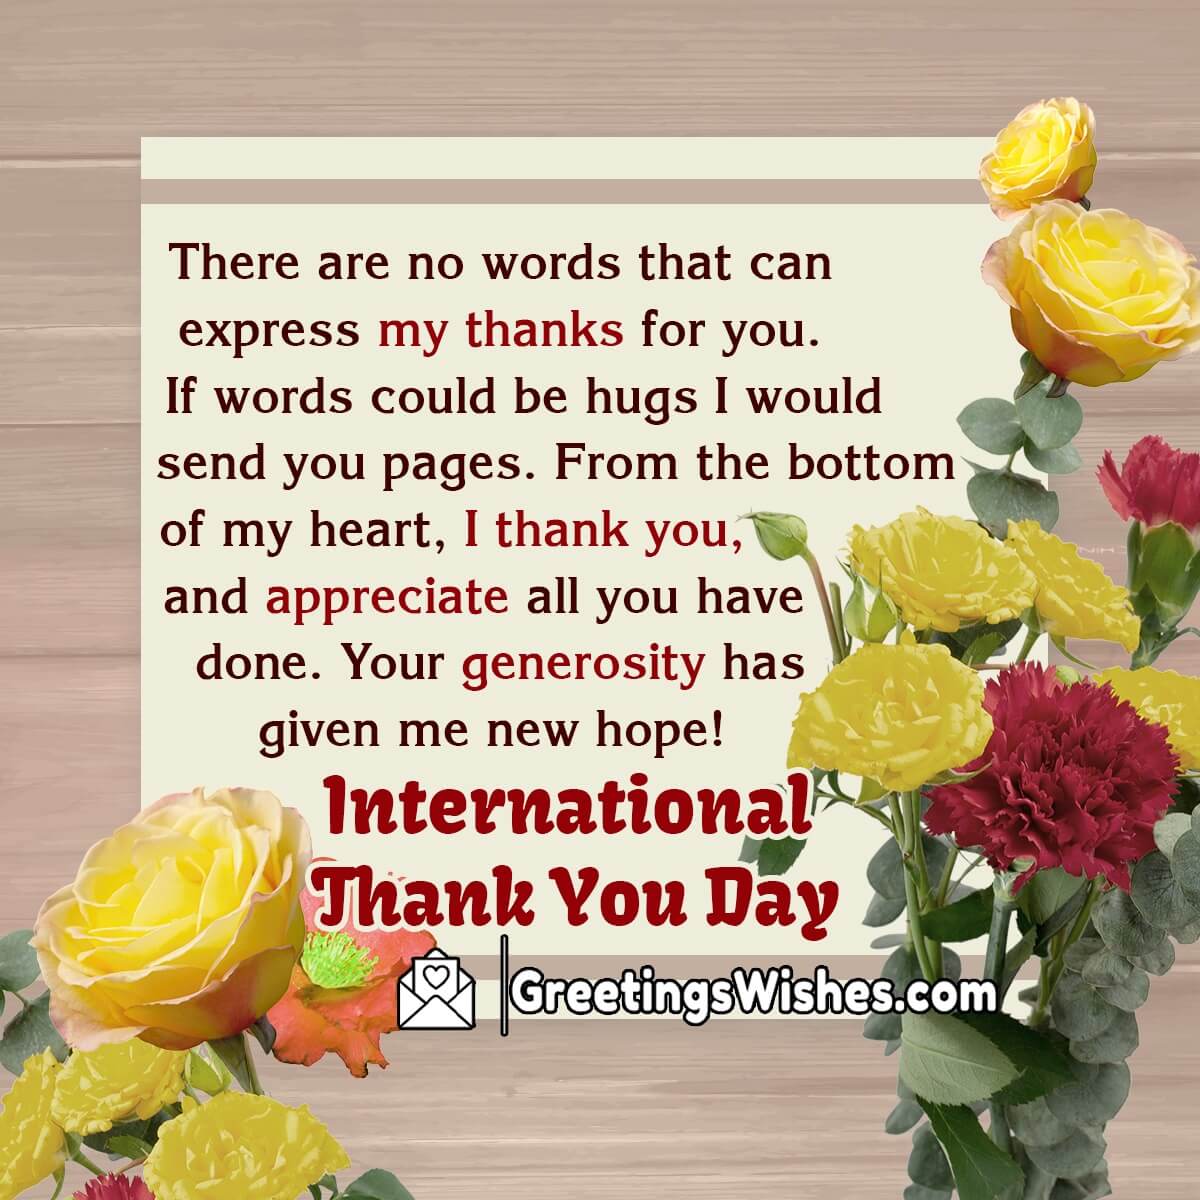 International Thank You Day Message